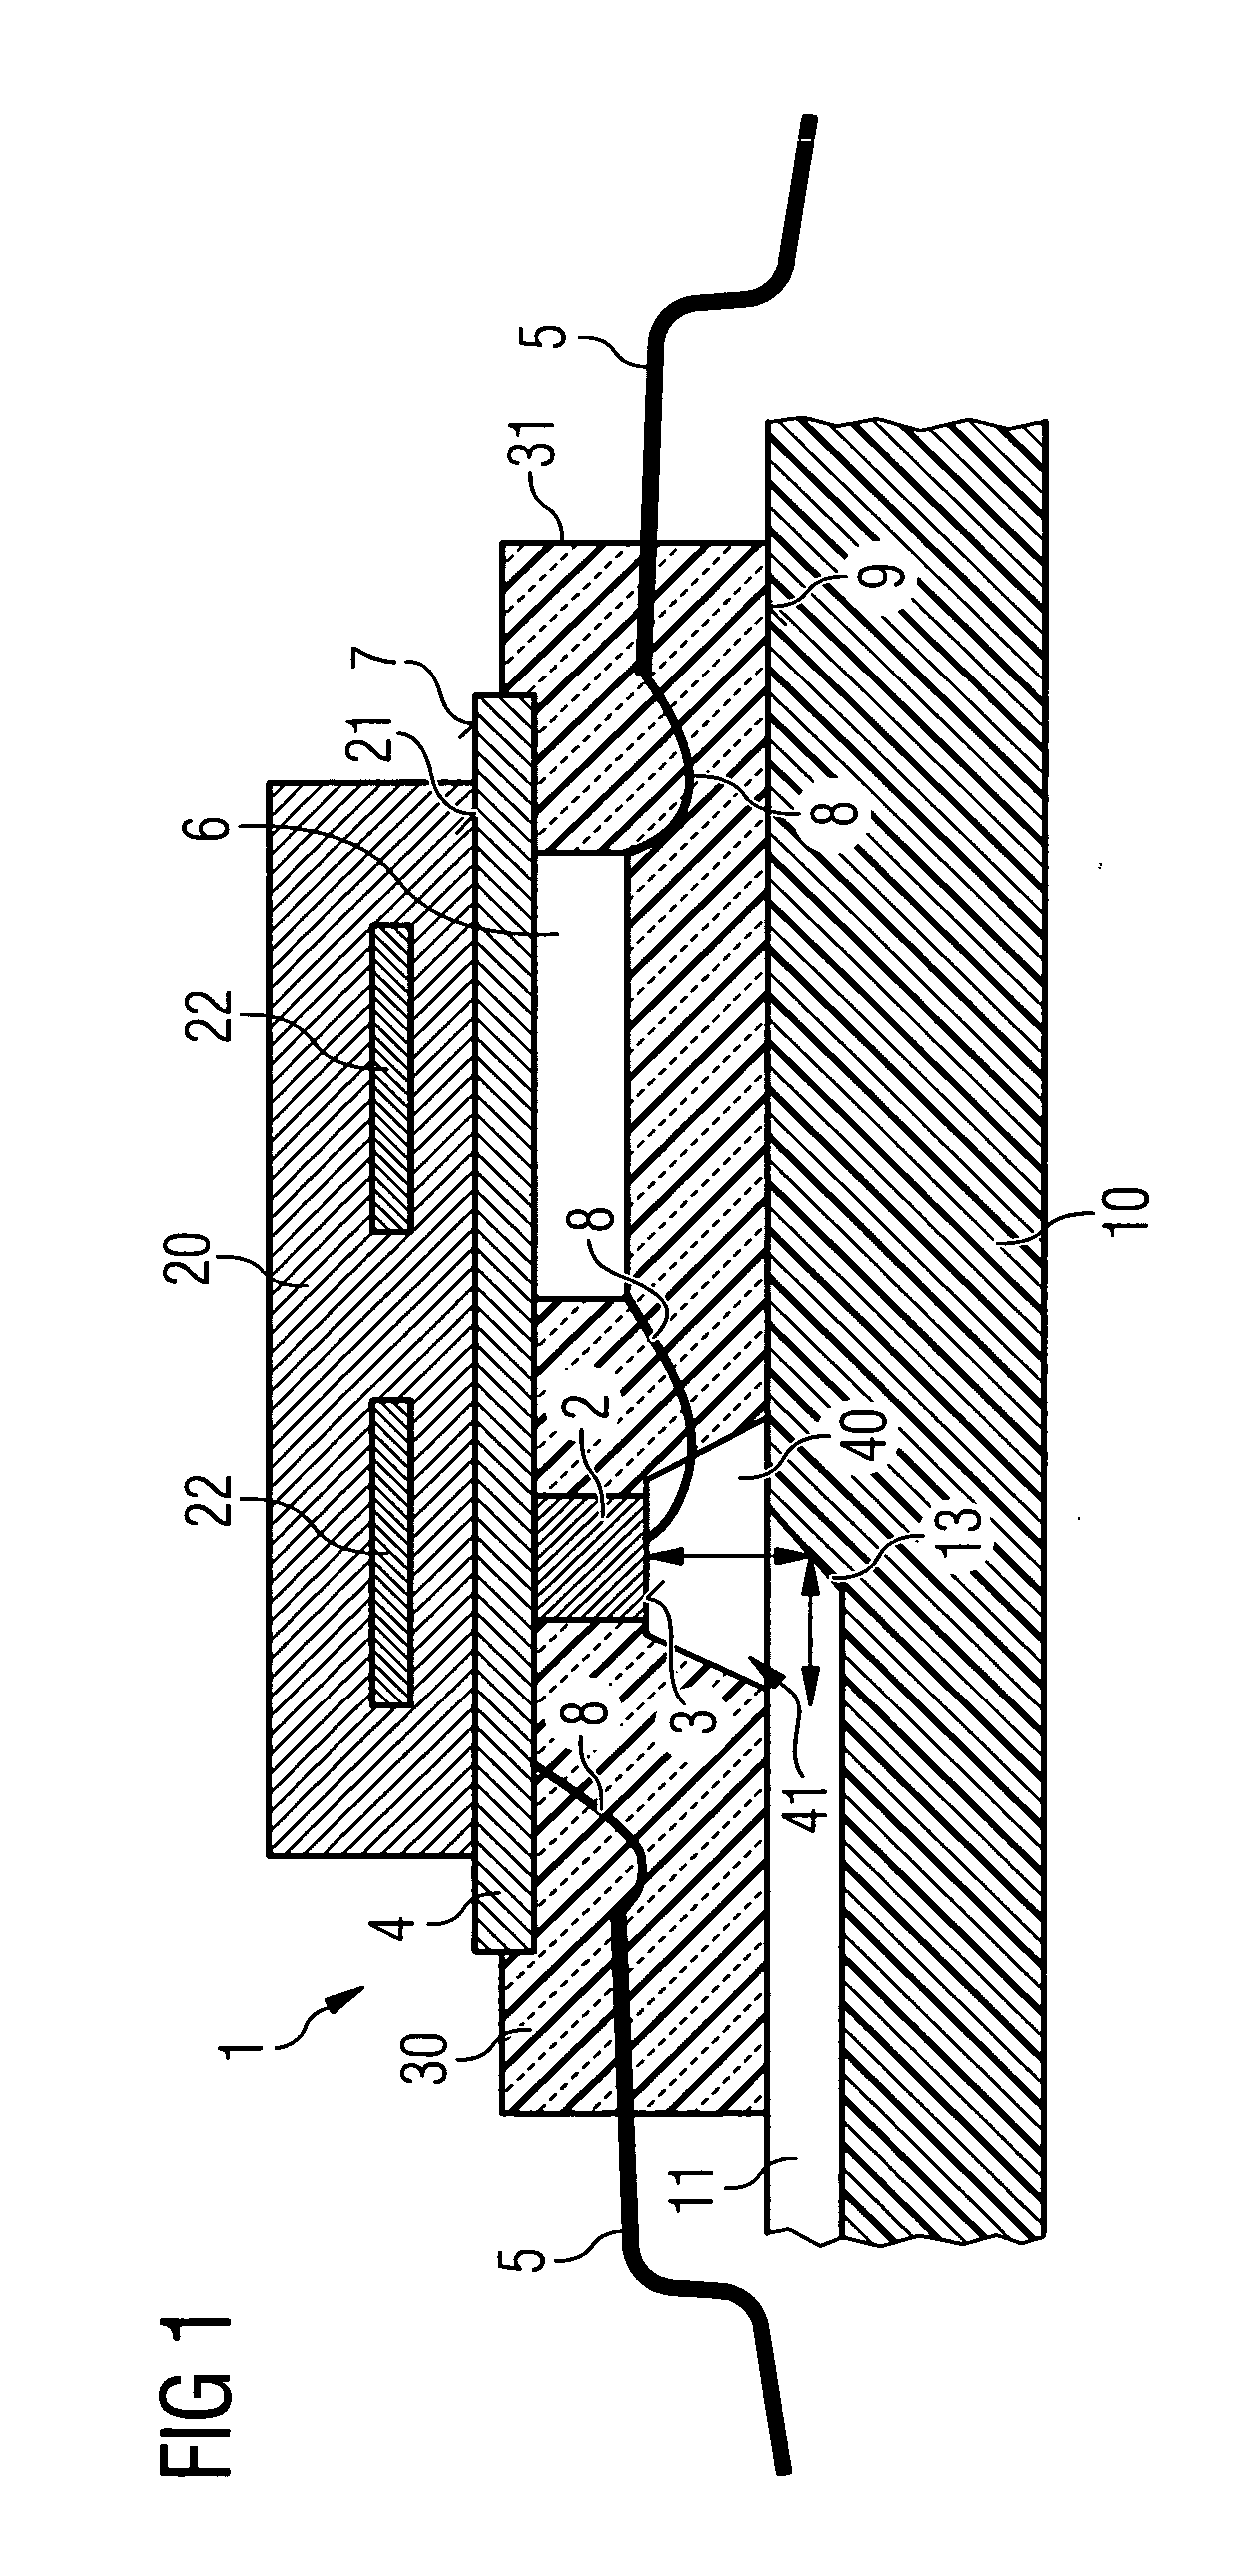 Optoelectronic arrangement having a surface-mountable semiconductor module and a cooling element